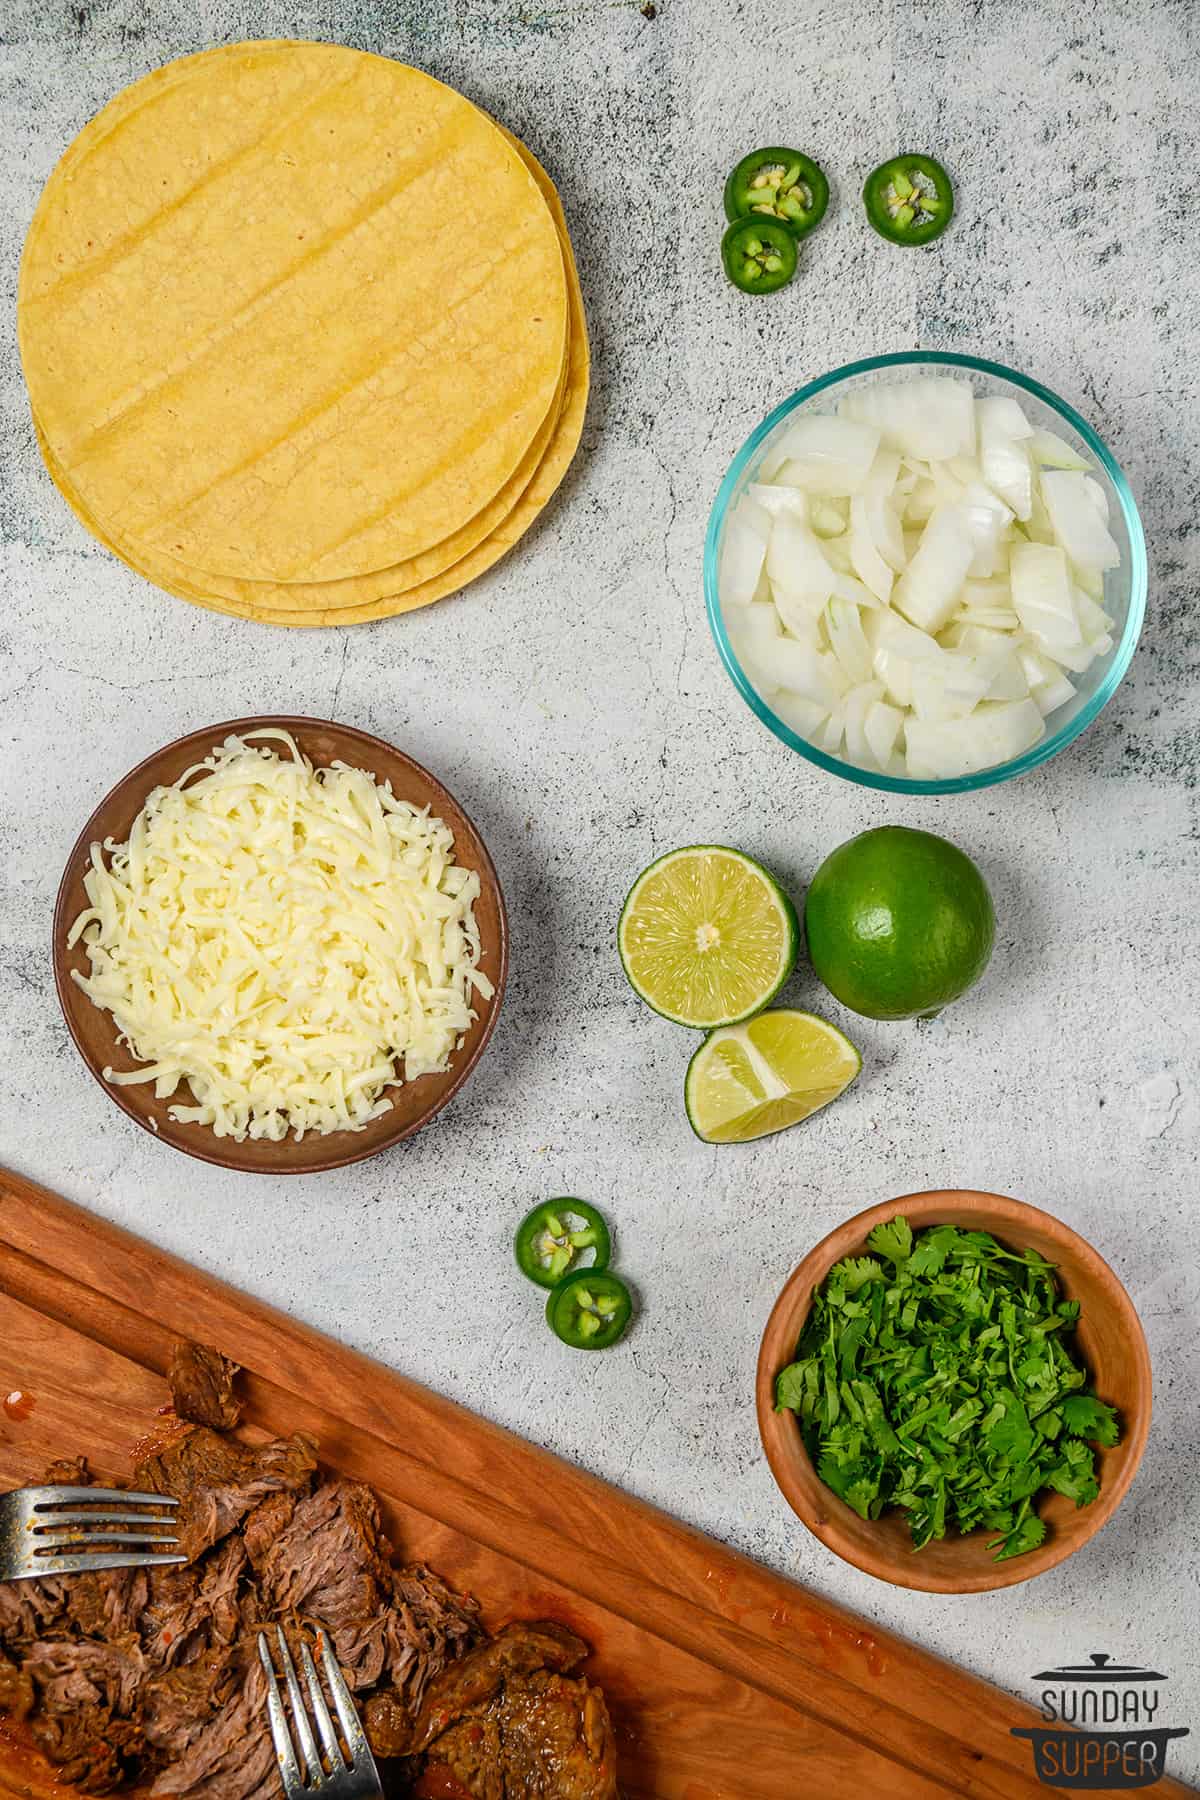 quesabirria toppings: onions, cilantro, limes, cheese, and tortillas on a table